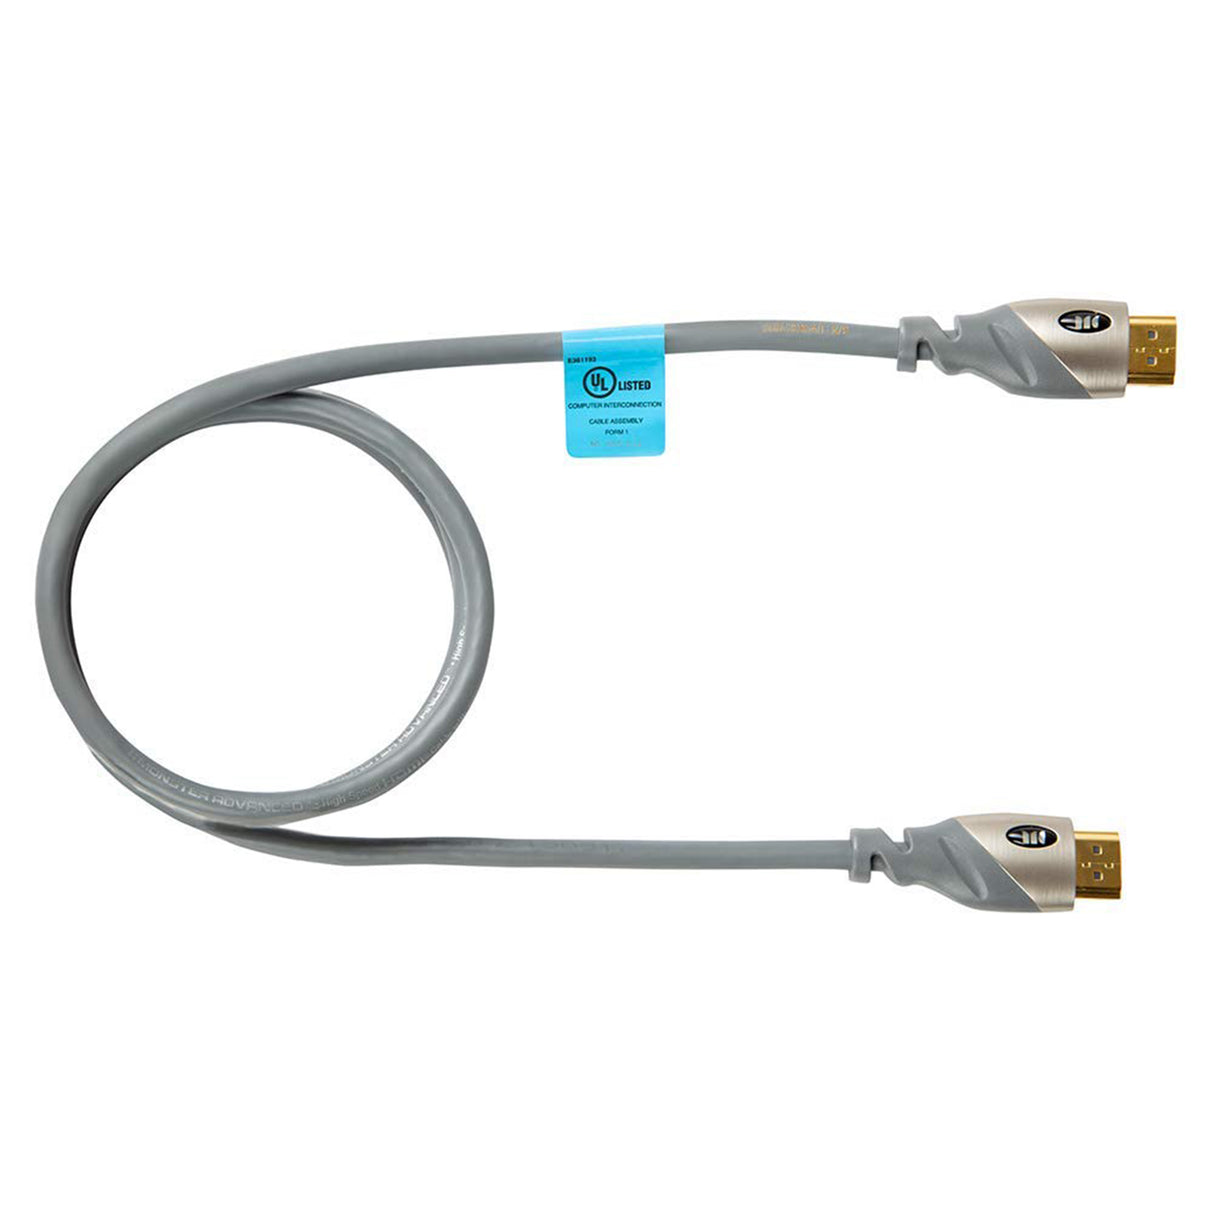 Monster Gold Advanced High Speed HDMI Ethernet Cable (10 Meter)